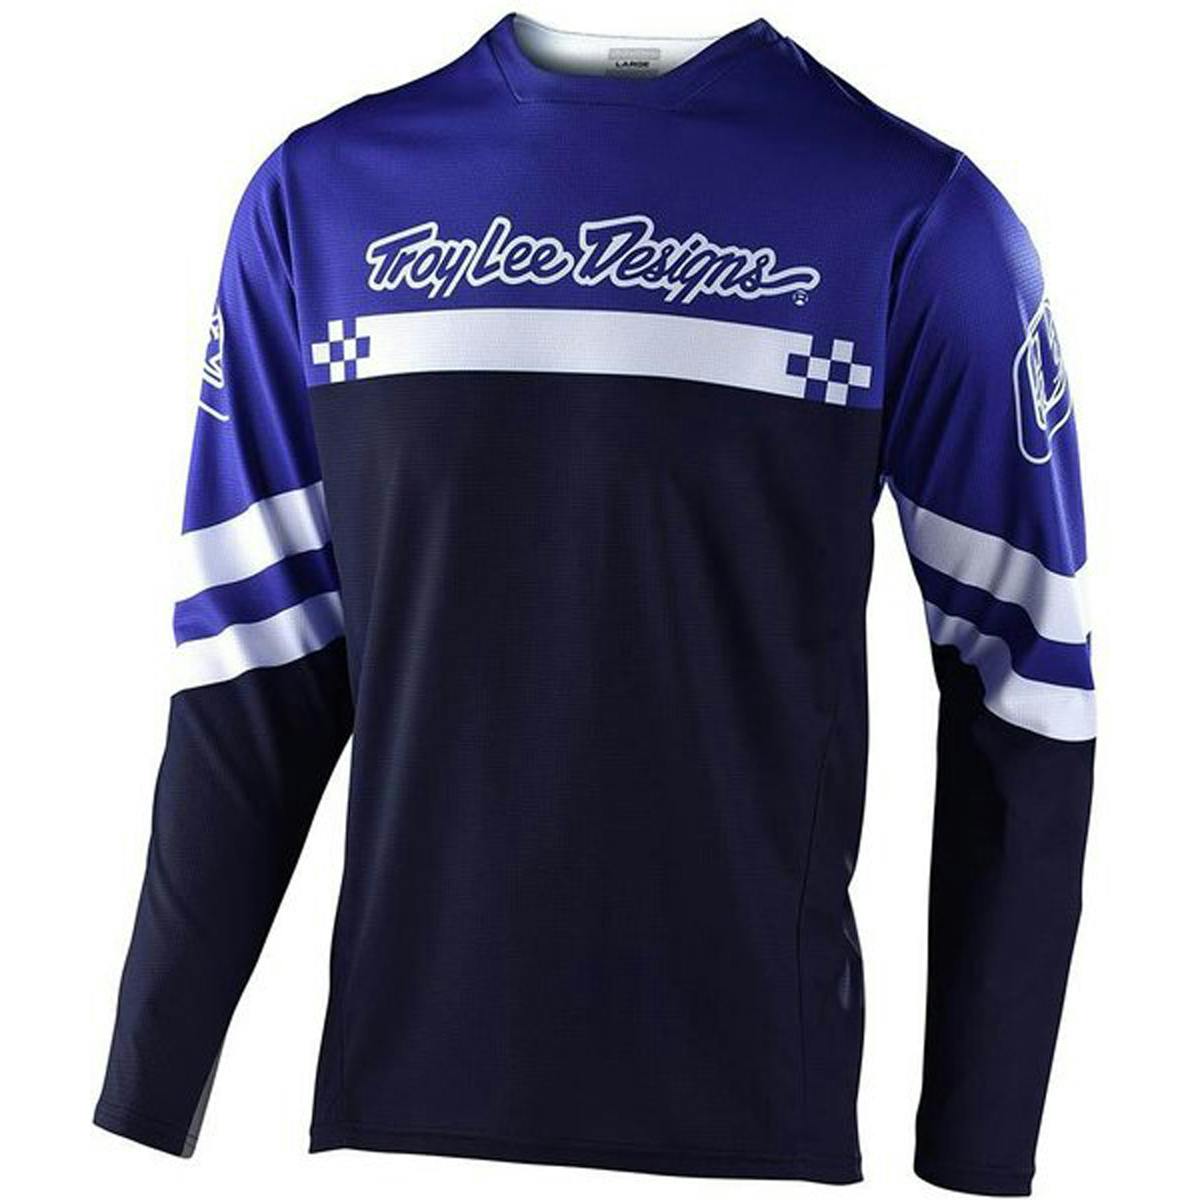 Troy Lee Designs Youth Sprint Jersey - Royal Blue/White - Small